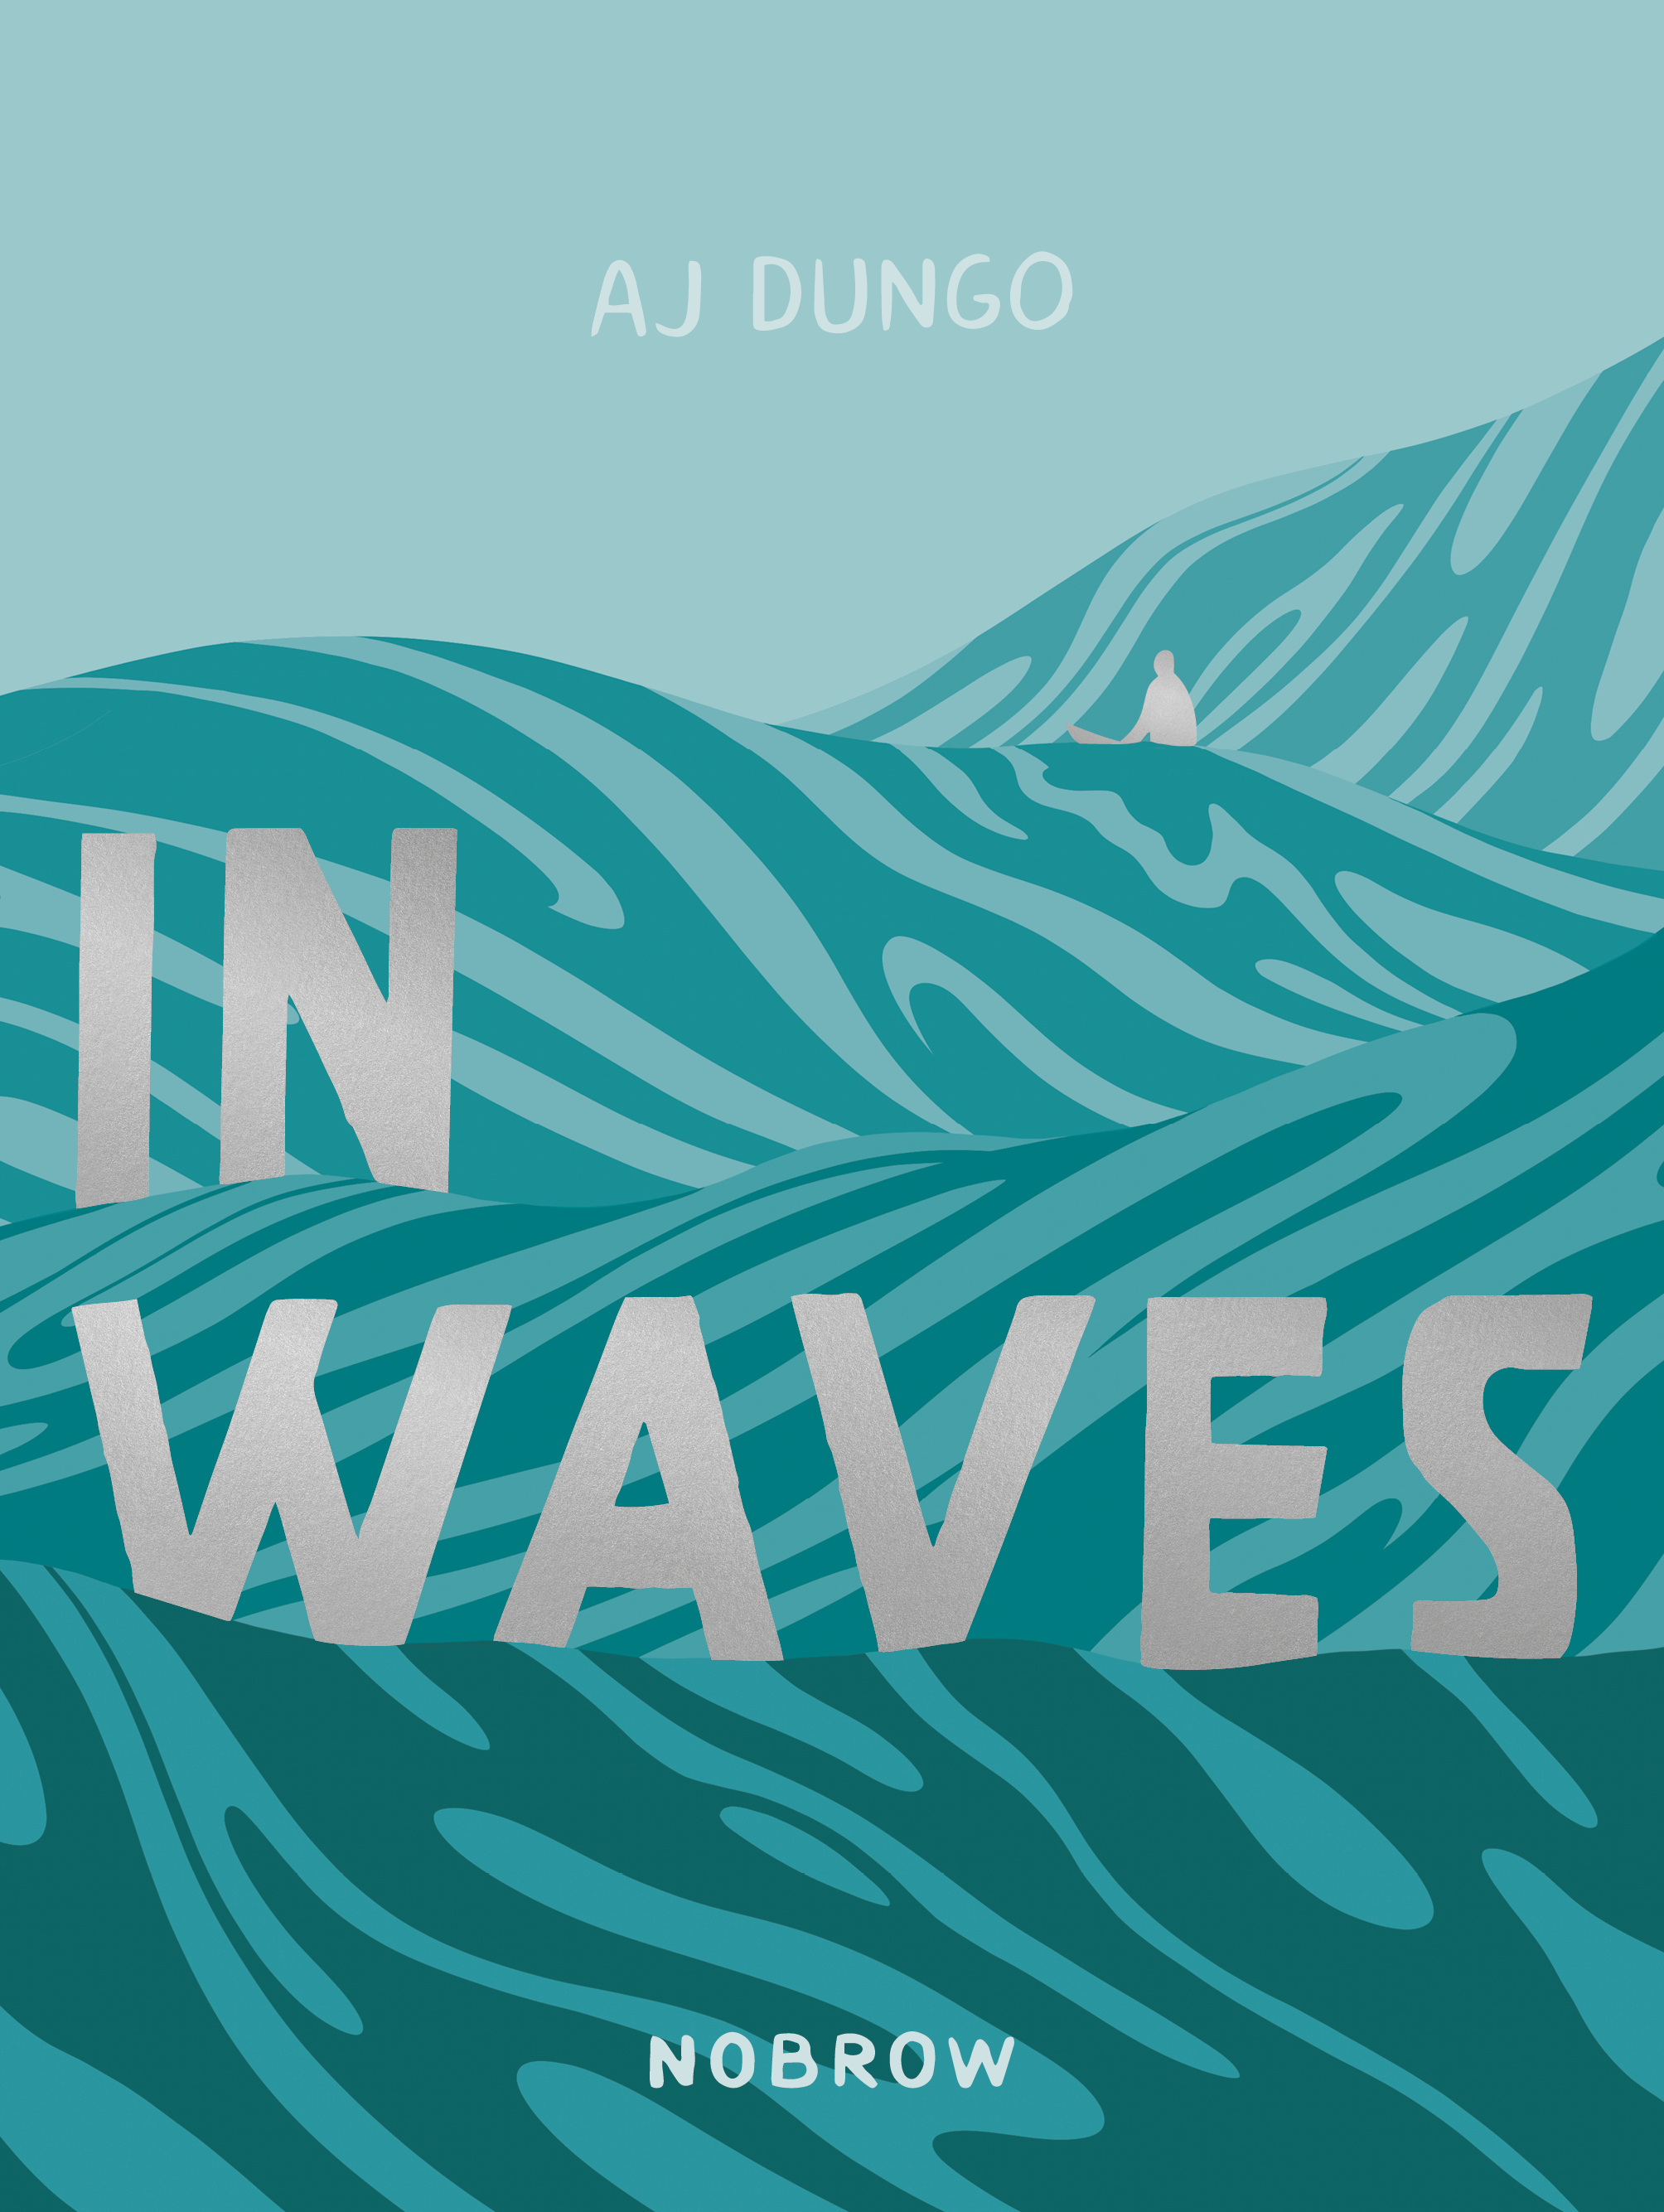 In waves : Aj Dungo - 2203192399 - Comics